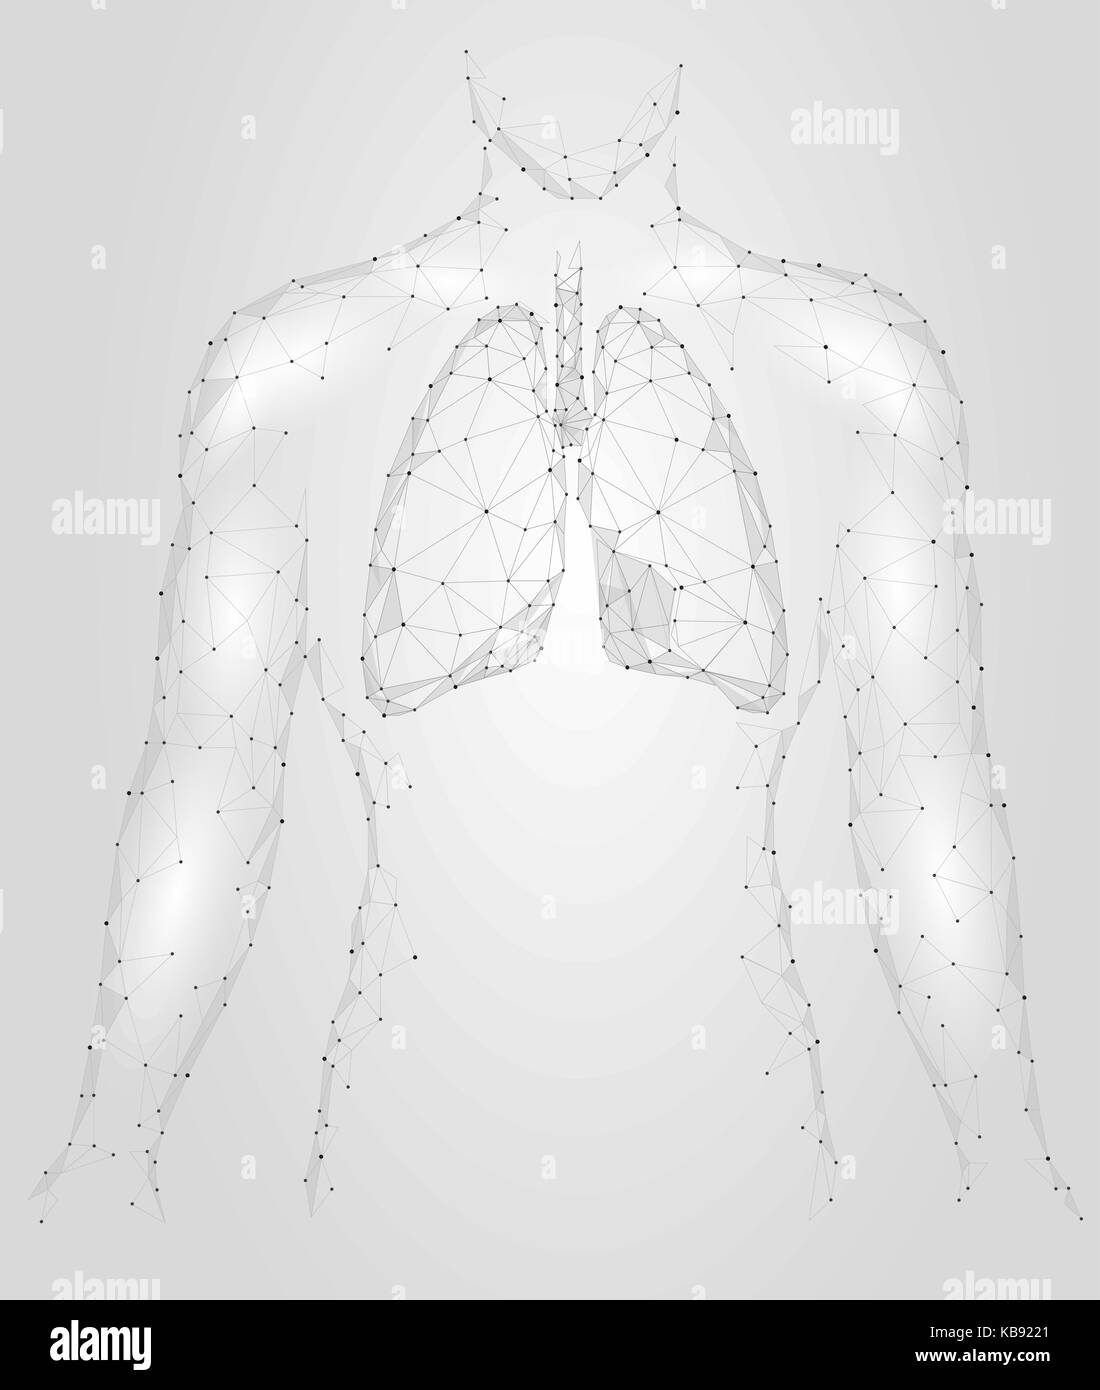 Human Lungs Pulmonary infection Internal Organ. Respiratory system Inside Body Silhouette. Low Poly 3d Connected Dots Triangle Polygonal Design. Gray White Color Background Vector Illustration Stock Vector